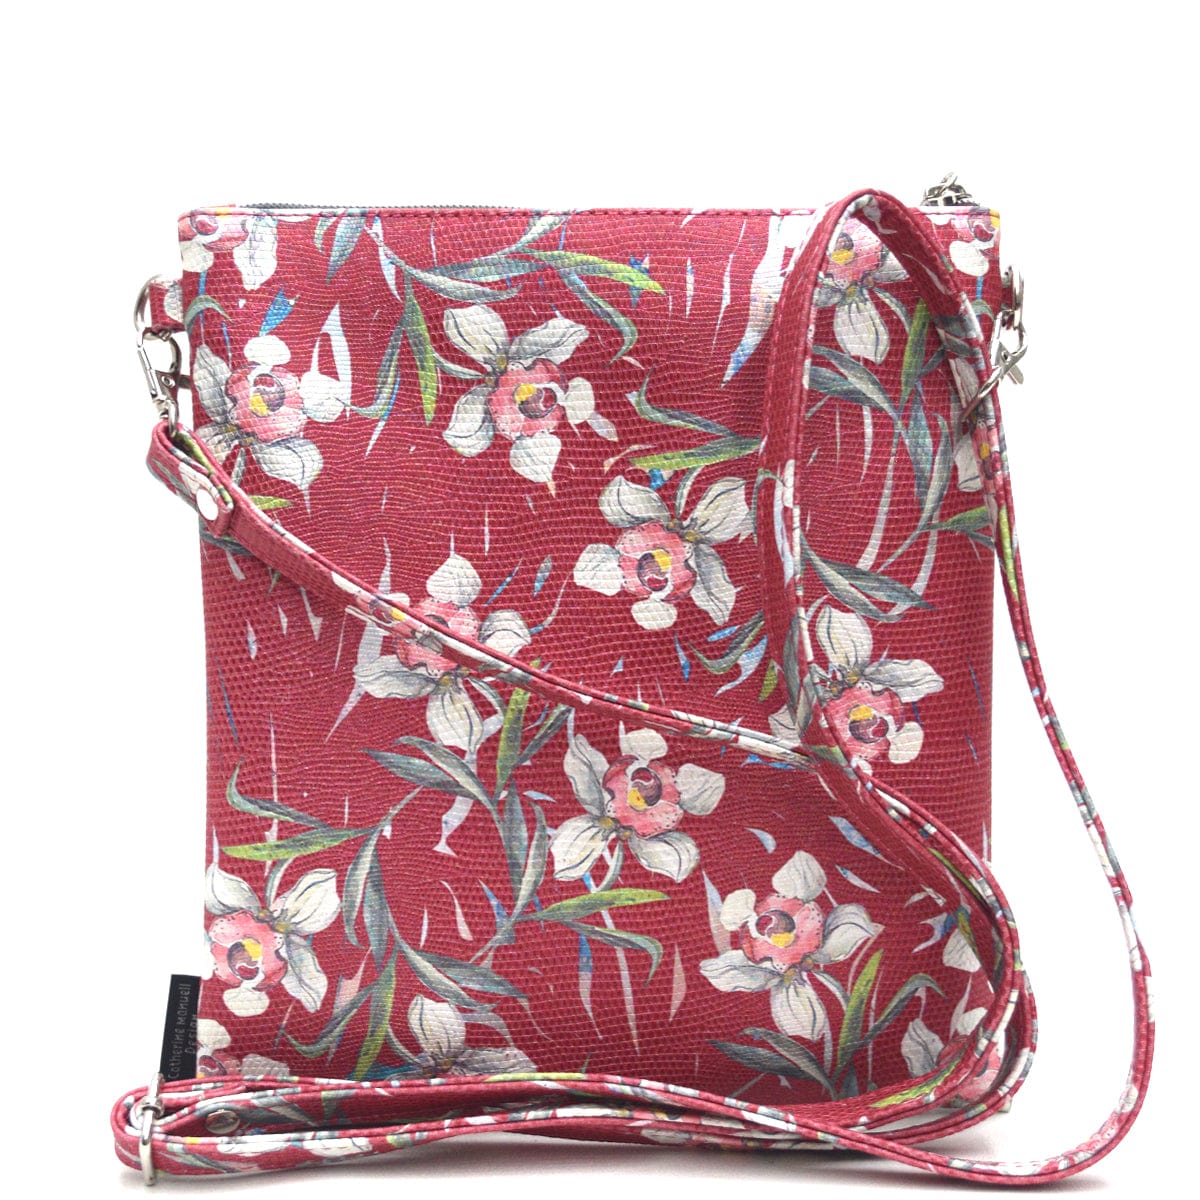 Roma Tote - Red Rose Flower